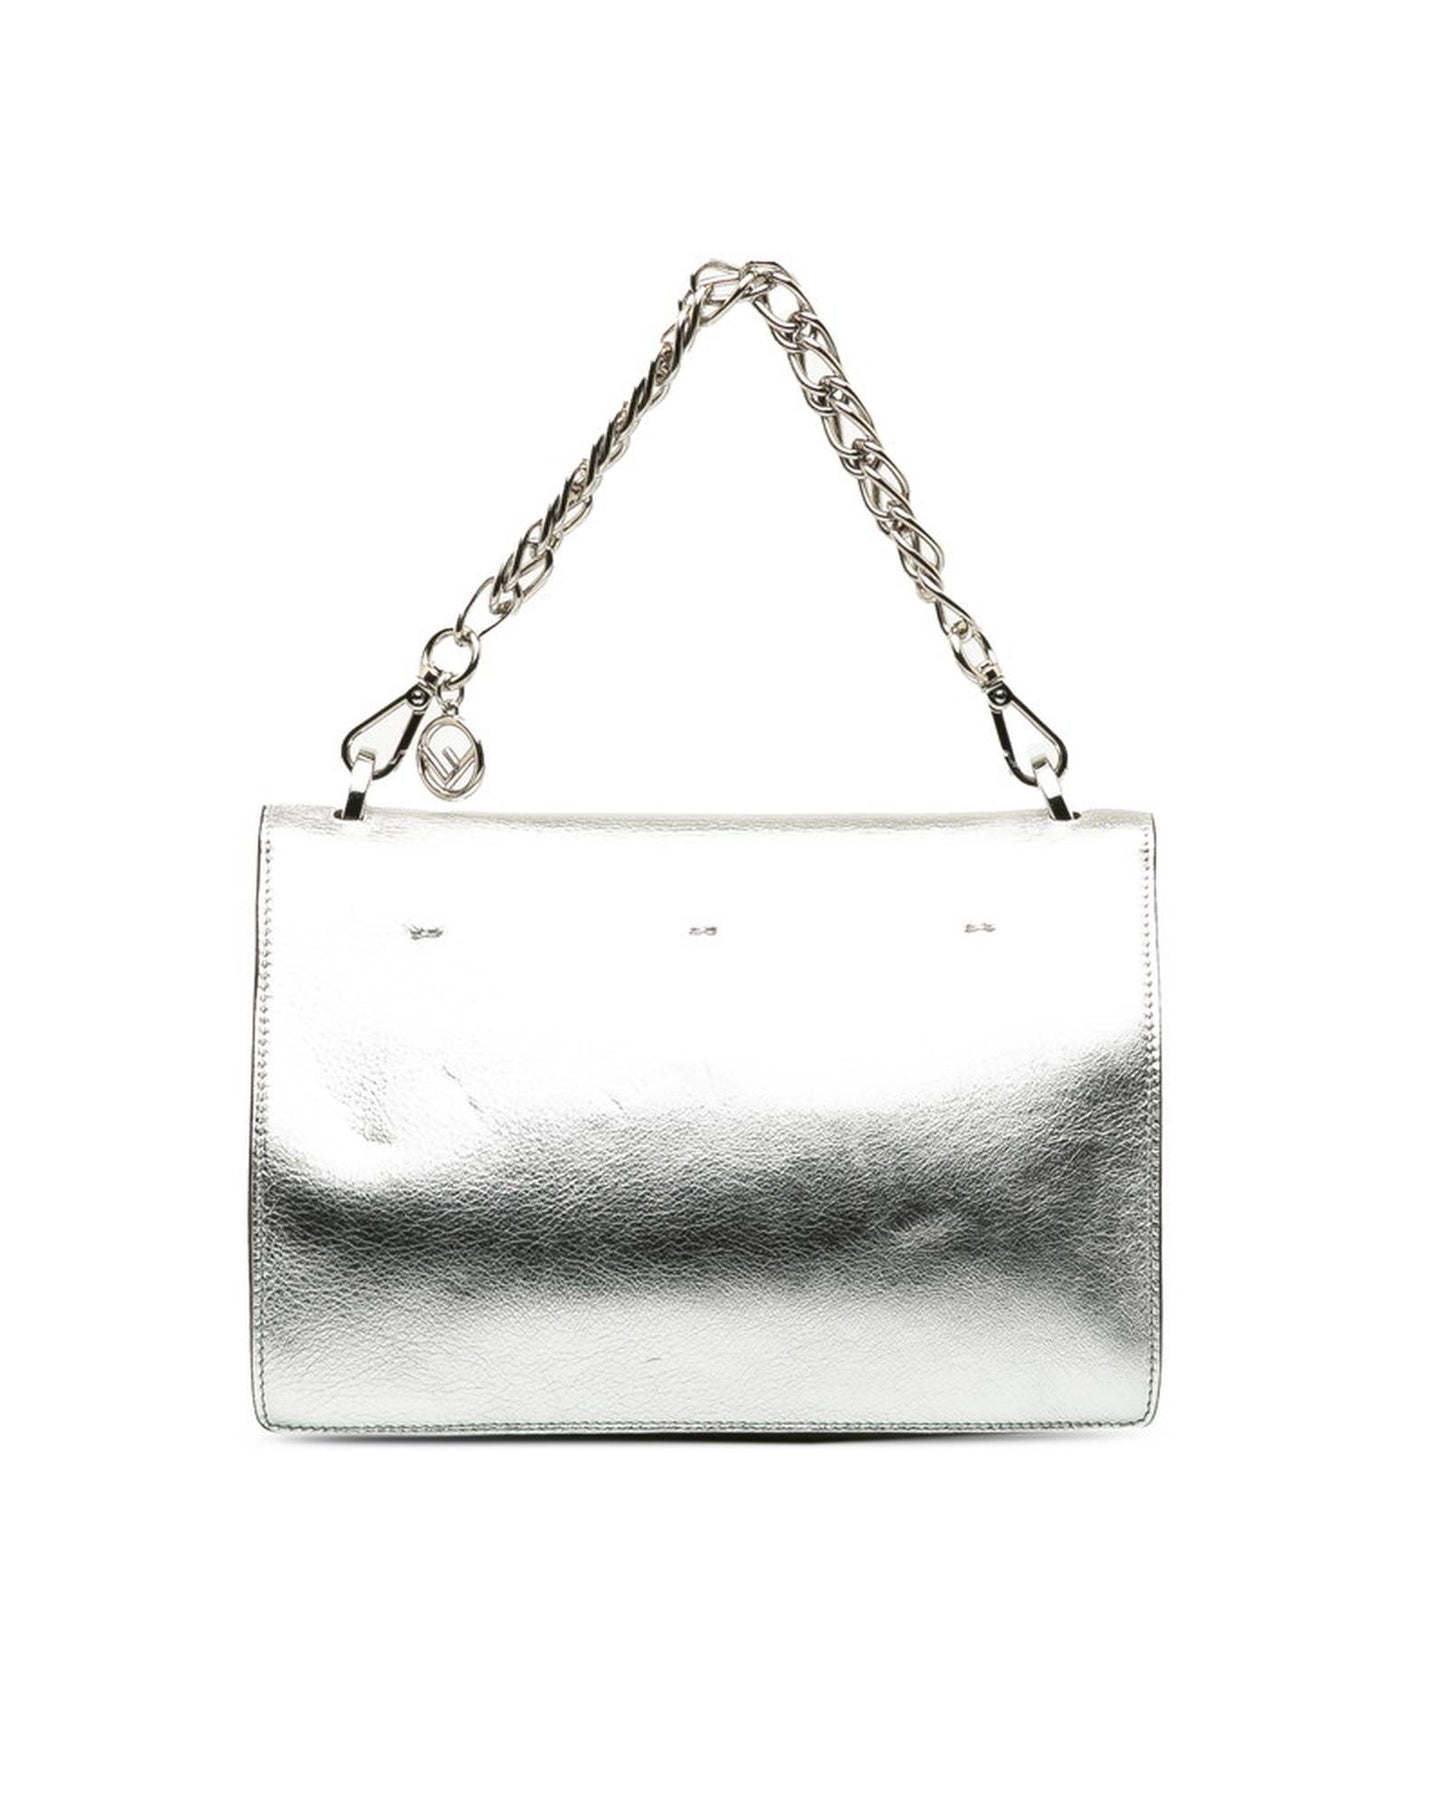 Fendi Women's Silver Leather Shoulder Bag in Excellent Condition in Silver